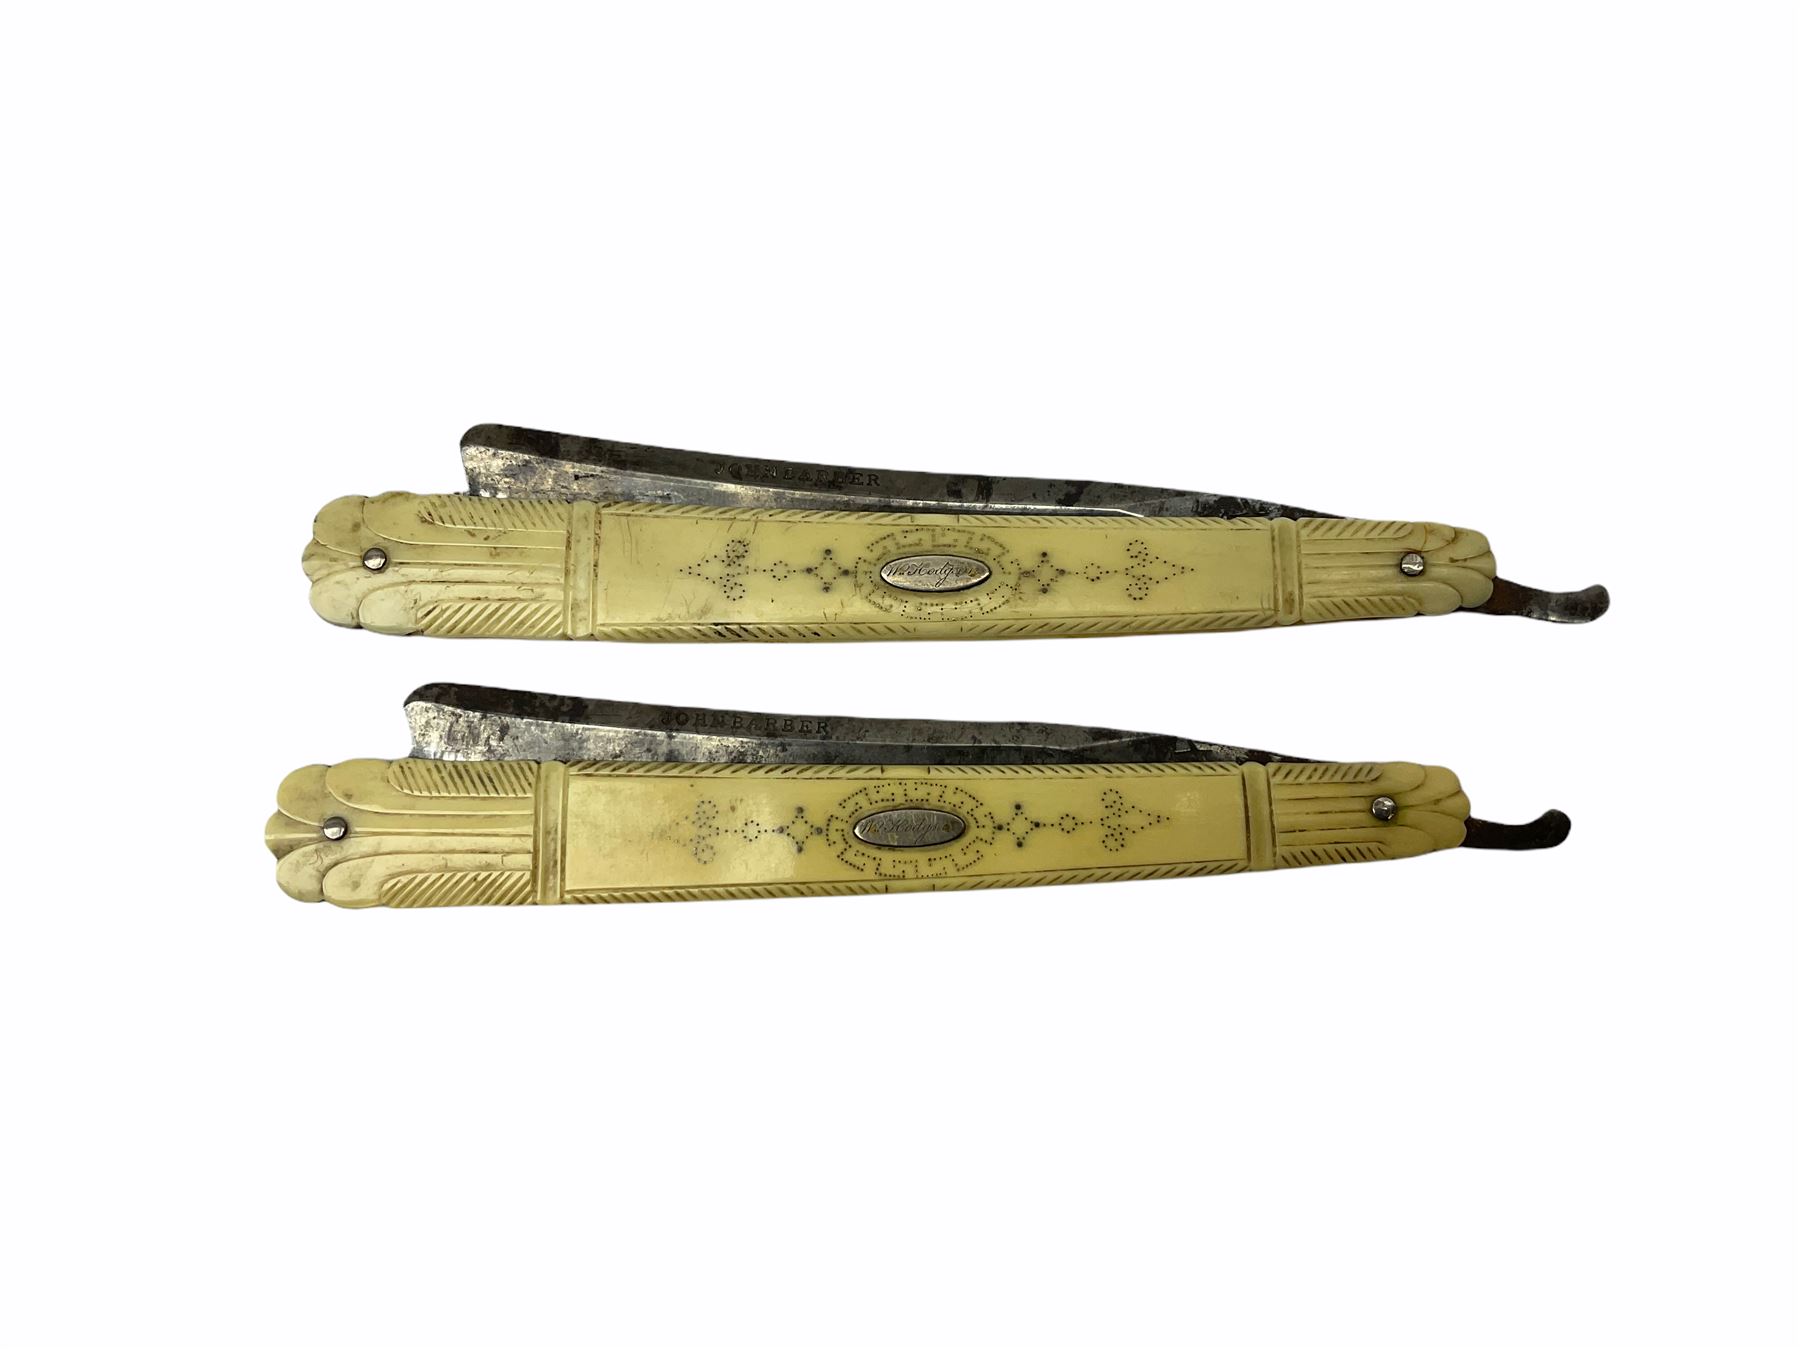 Pair of early 19th century John Barber ivory cut-throat razors with pique work decoration - Image 7 of 10